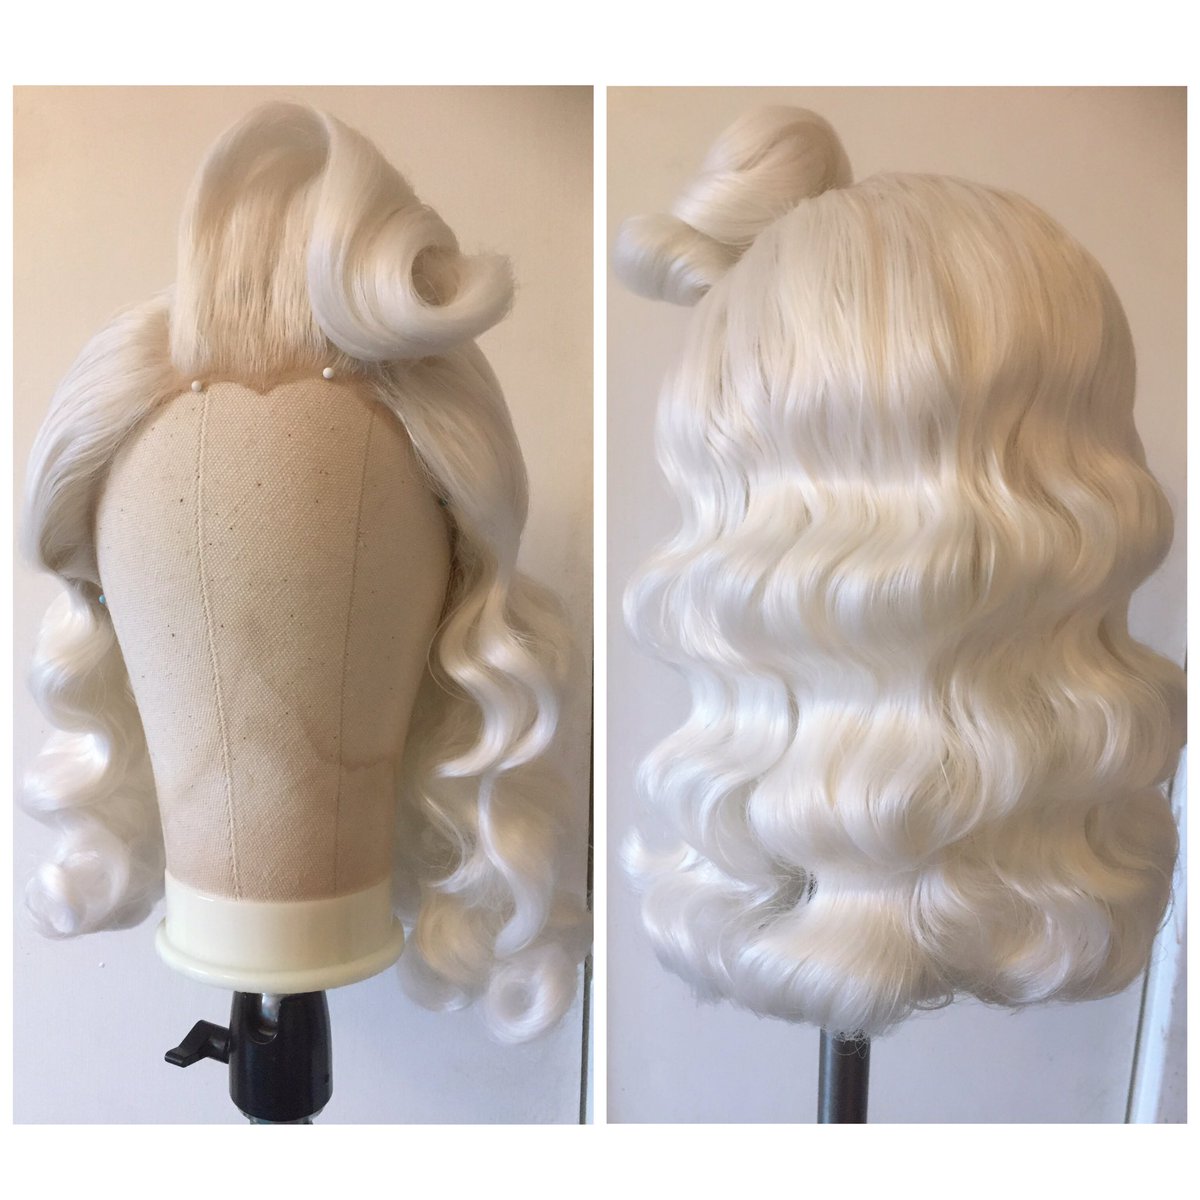 A Hollywood wave freshen up ❤️✨

#hairstylist #hairdresser #hair #wigstyling #wigdressing #syntheticwigs #frontlacewig #wig #wigs #vintage #vintagehair #vintagewig #40shairstyle #1940s #hollywoodwaves #drag #dragwig #cosplay #cosplaywig #northampton #thepowderpuffparlour